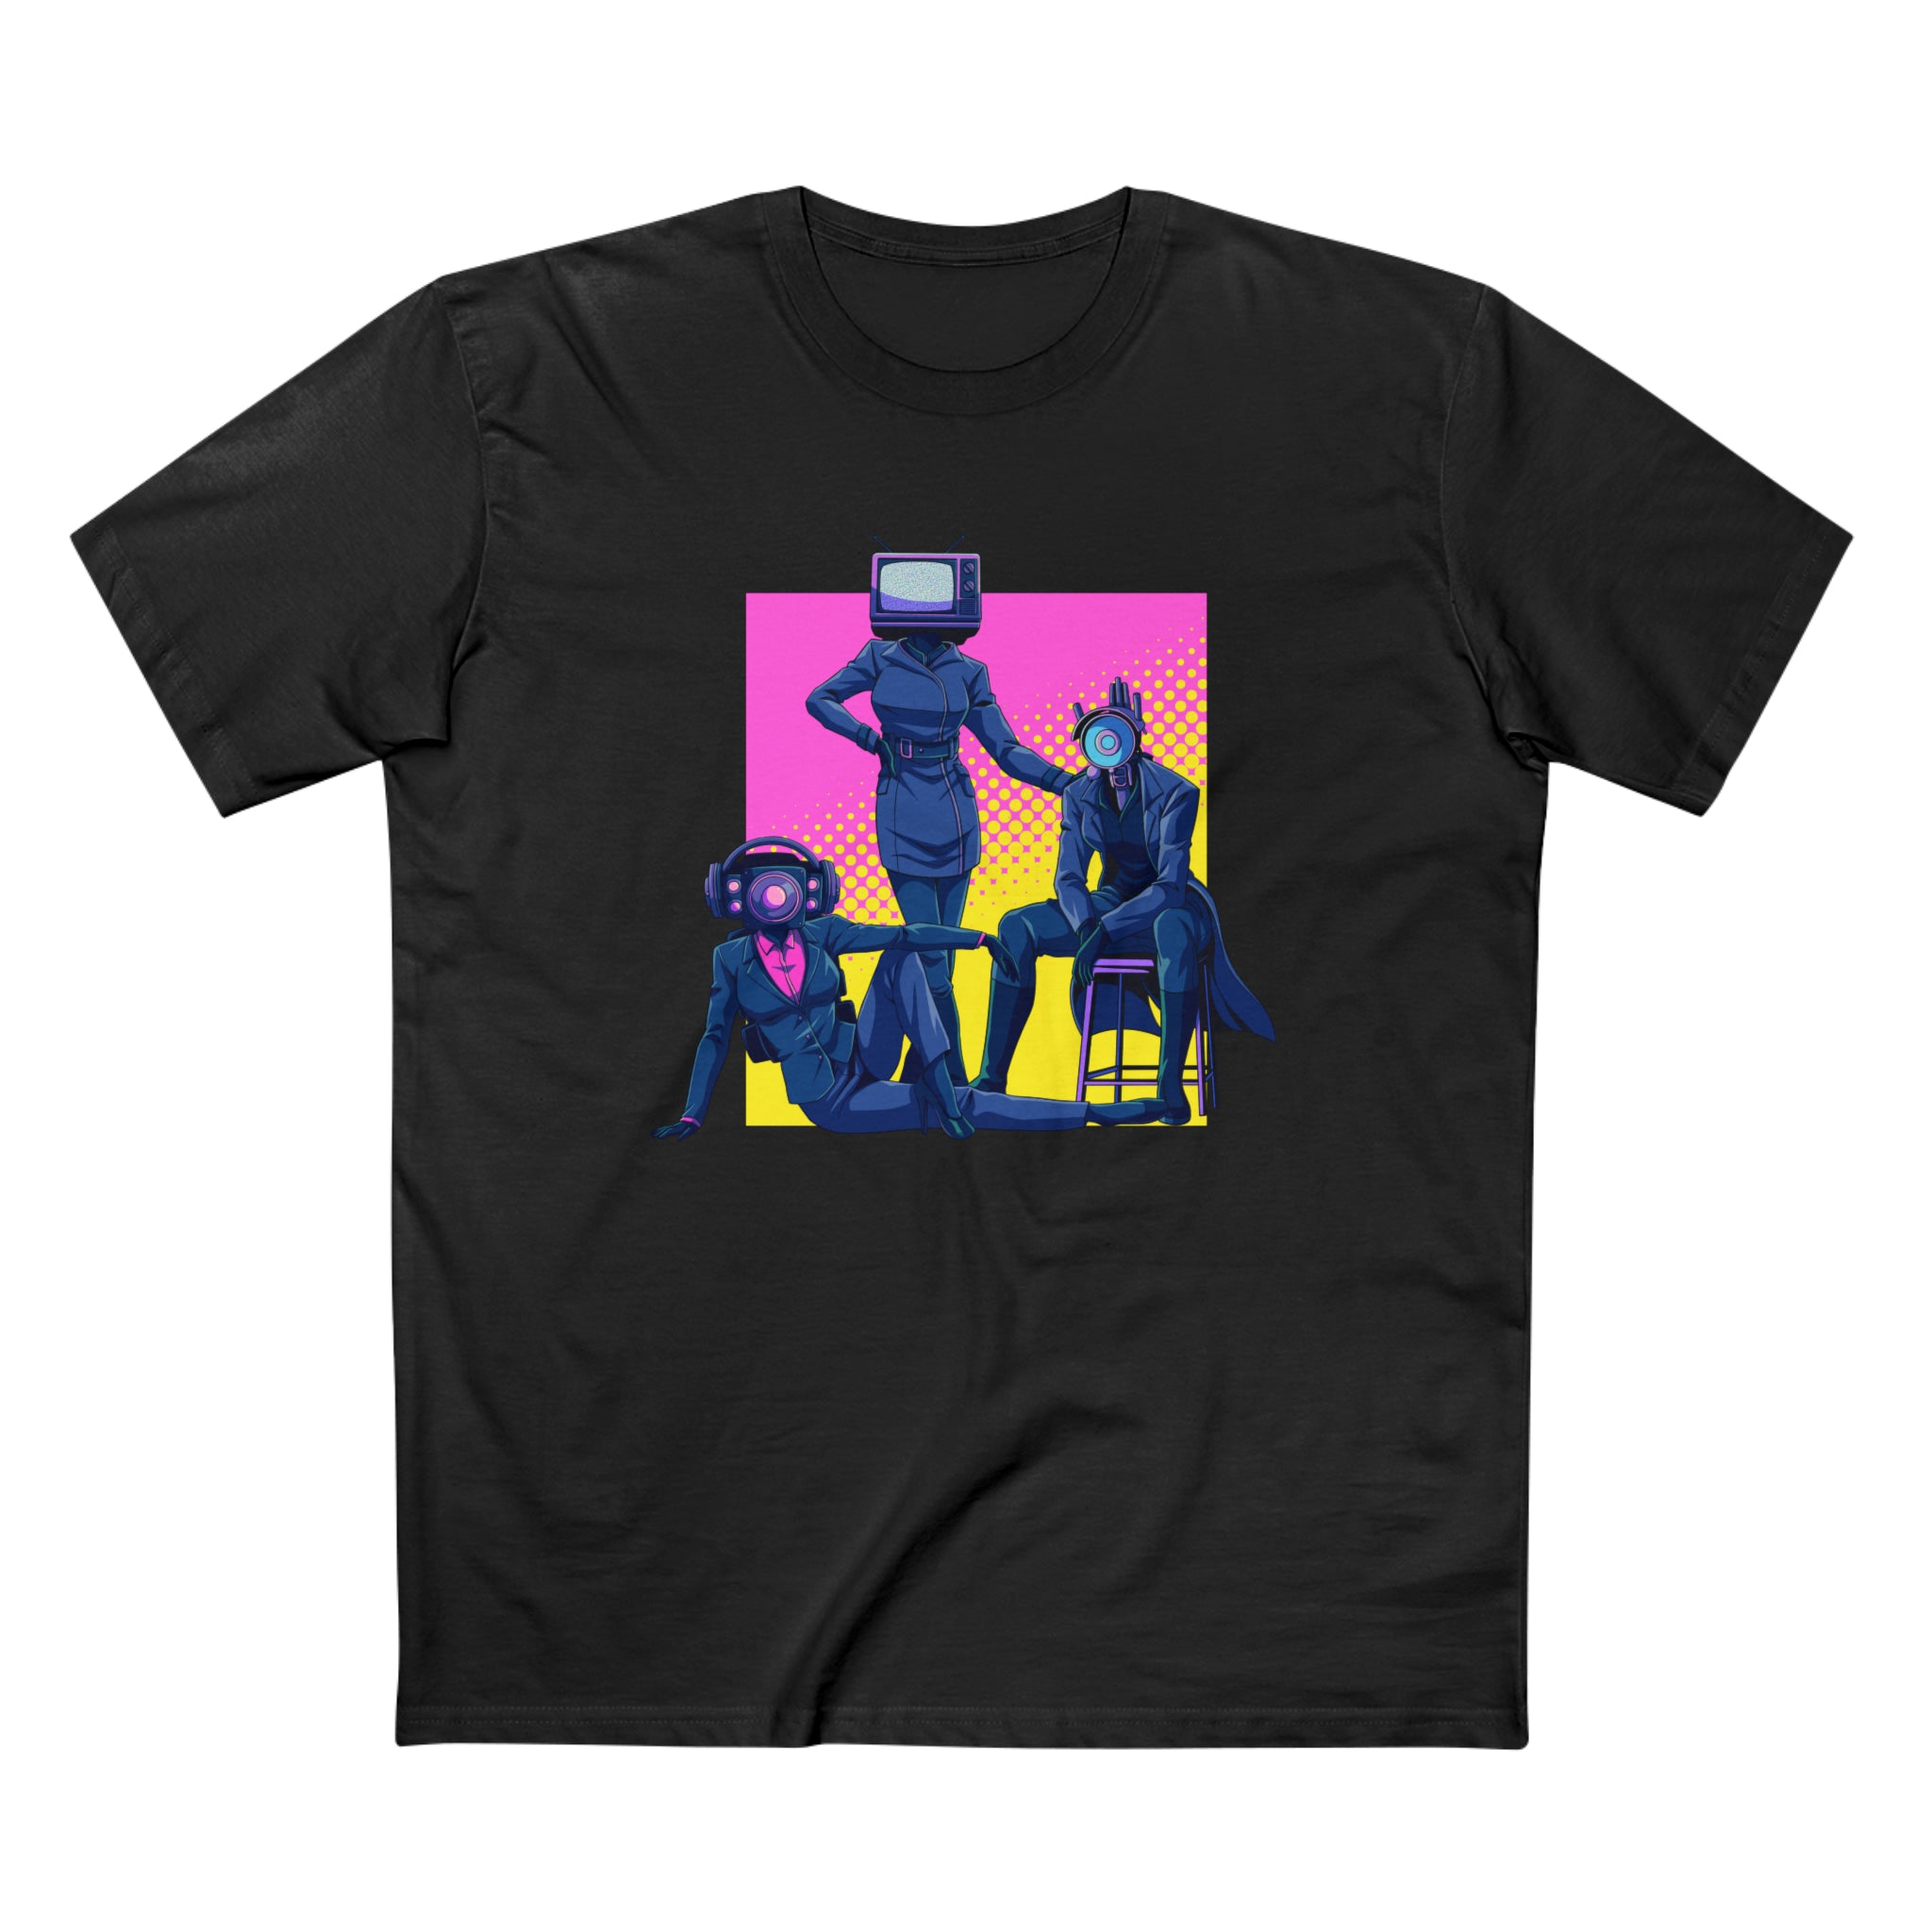 Lethal Trio Tee - Adult